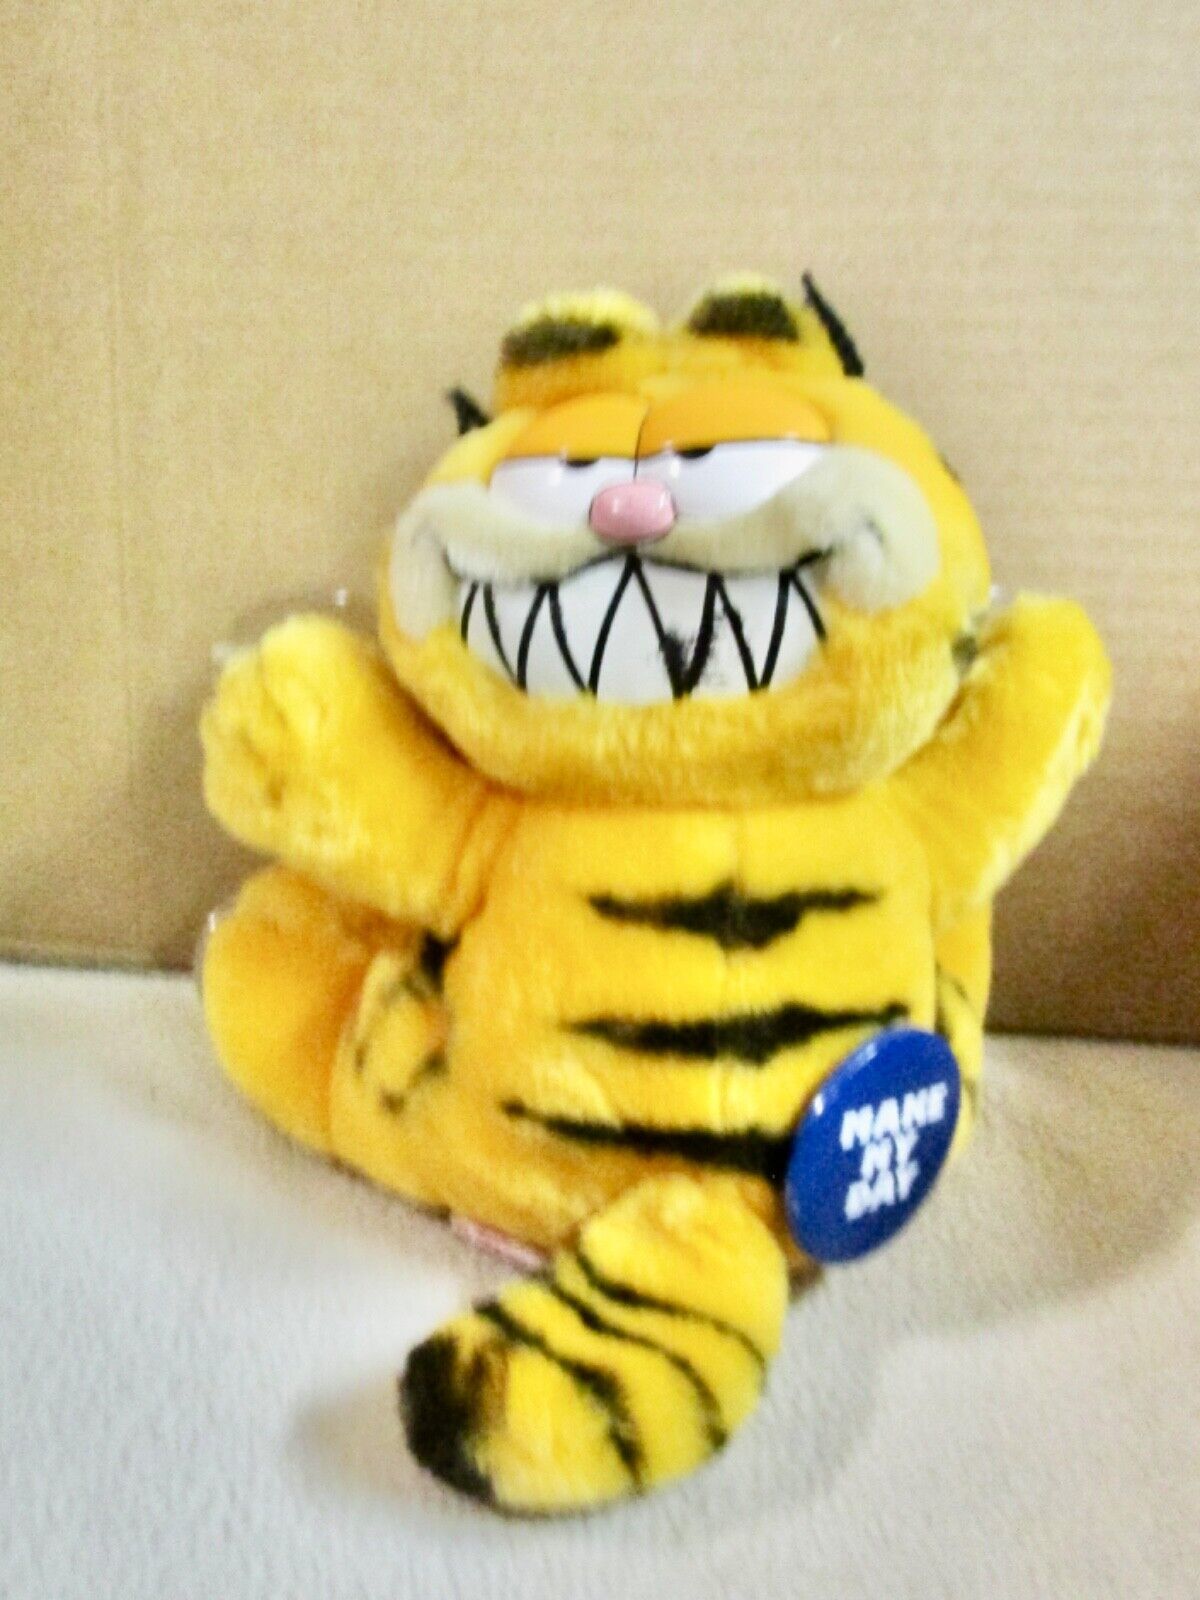 Vintage 1981 Garfield “Make My Day” Window Cling Plush 8”- Dakin Angry Face (2)